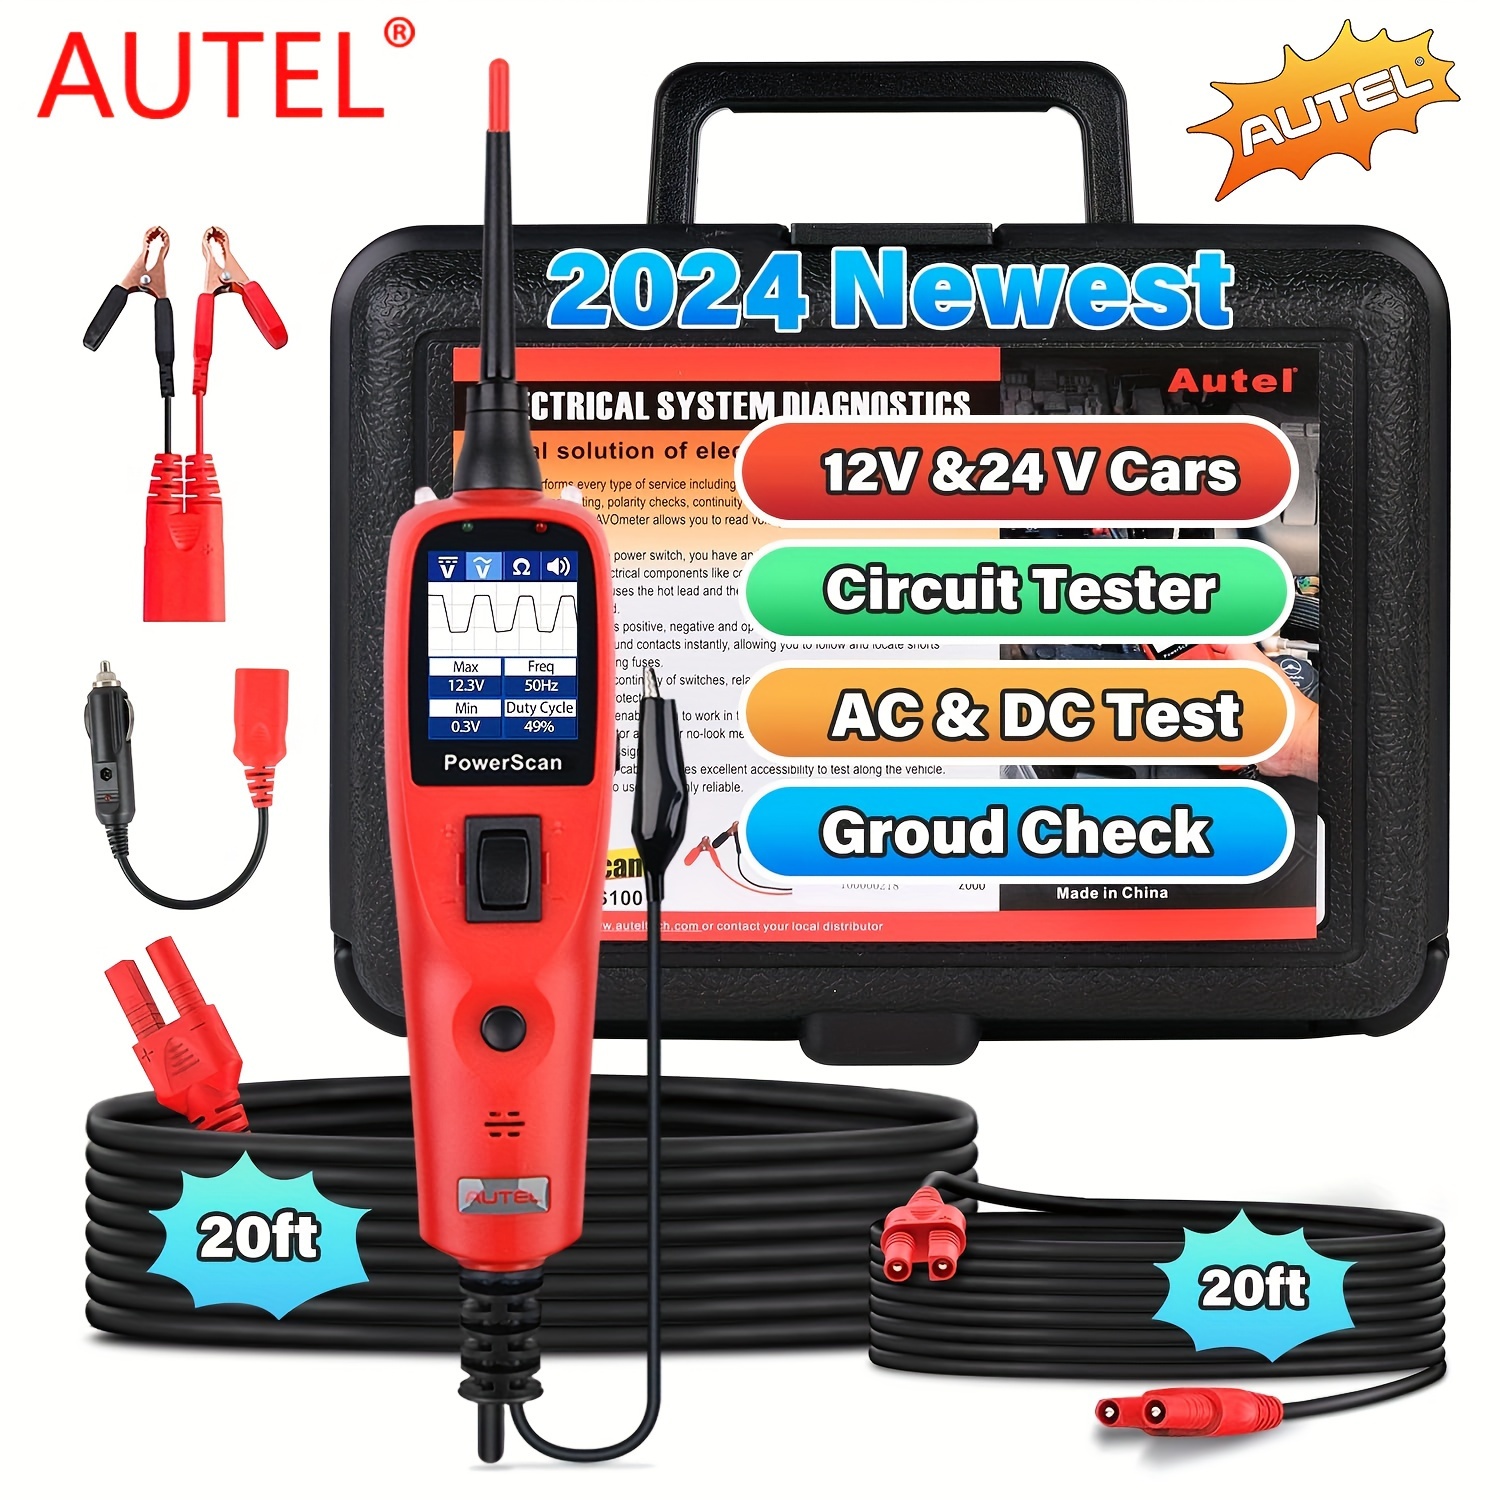 

Autel Powerscan Automotive Circuit Tester, 12v 24v Power Circuit Probe Kit, Digital Multimeter/relay & Diode Resistance Tool, For Frequency/duty Cycle/voltage Test, Activating Component, W/ 20ft Cable